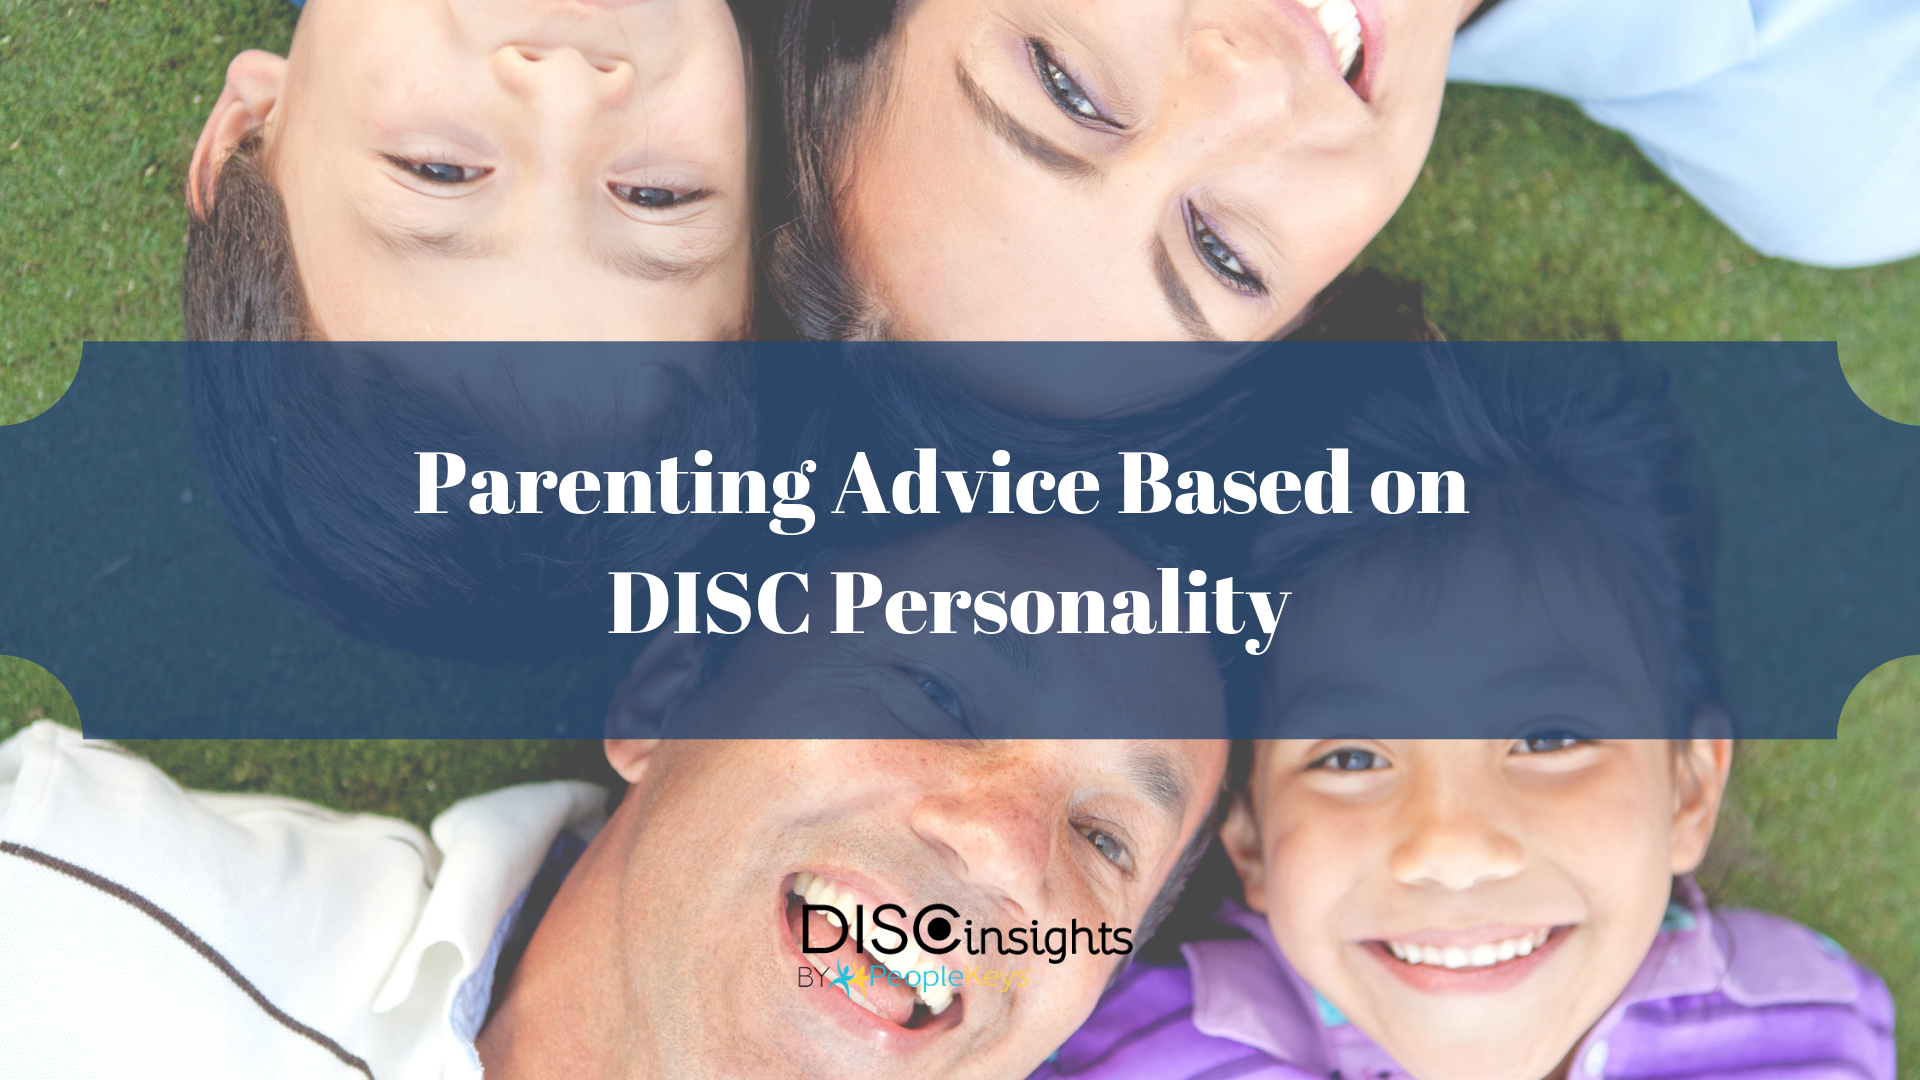 Parenting Advice Based on DISC Personality